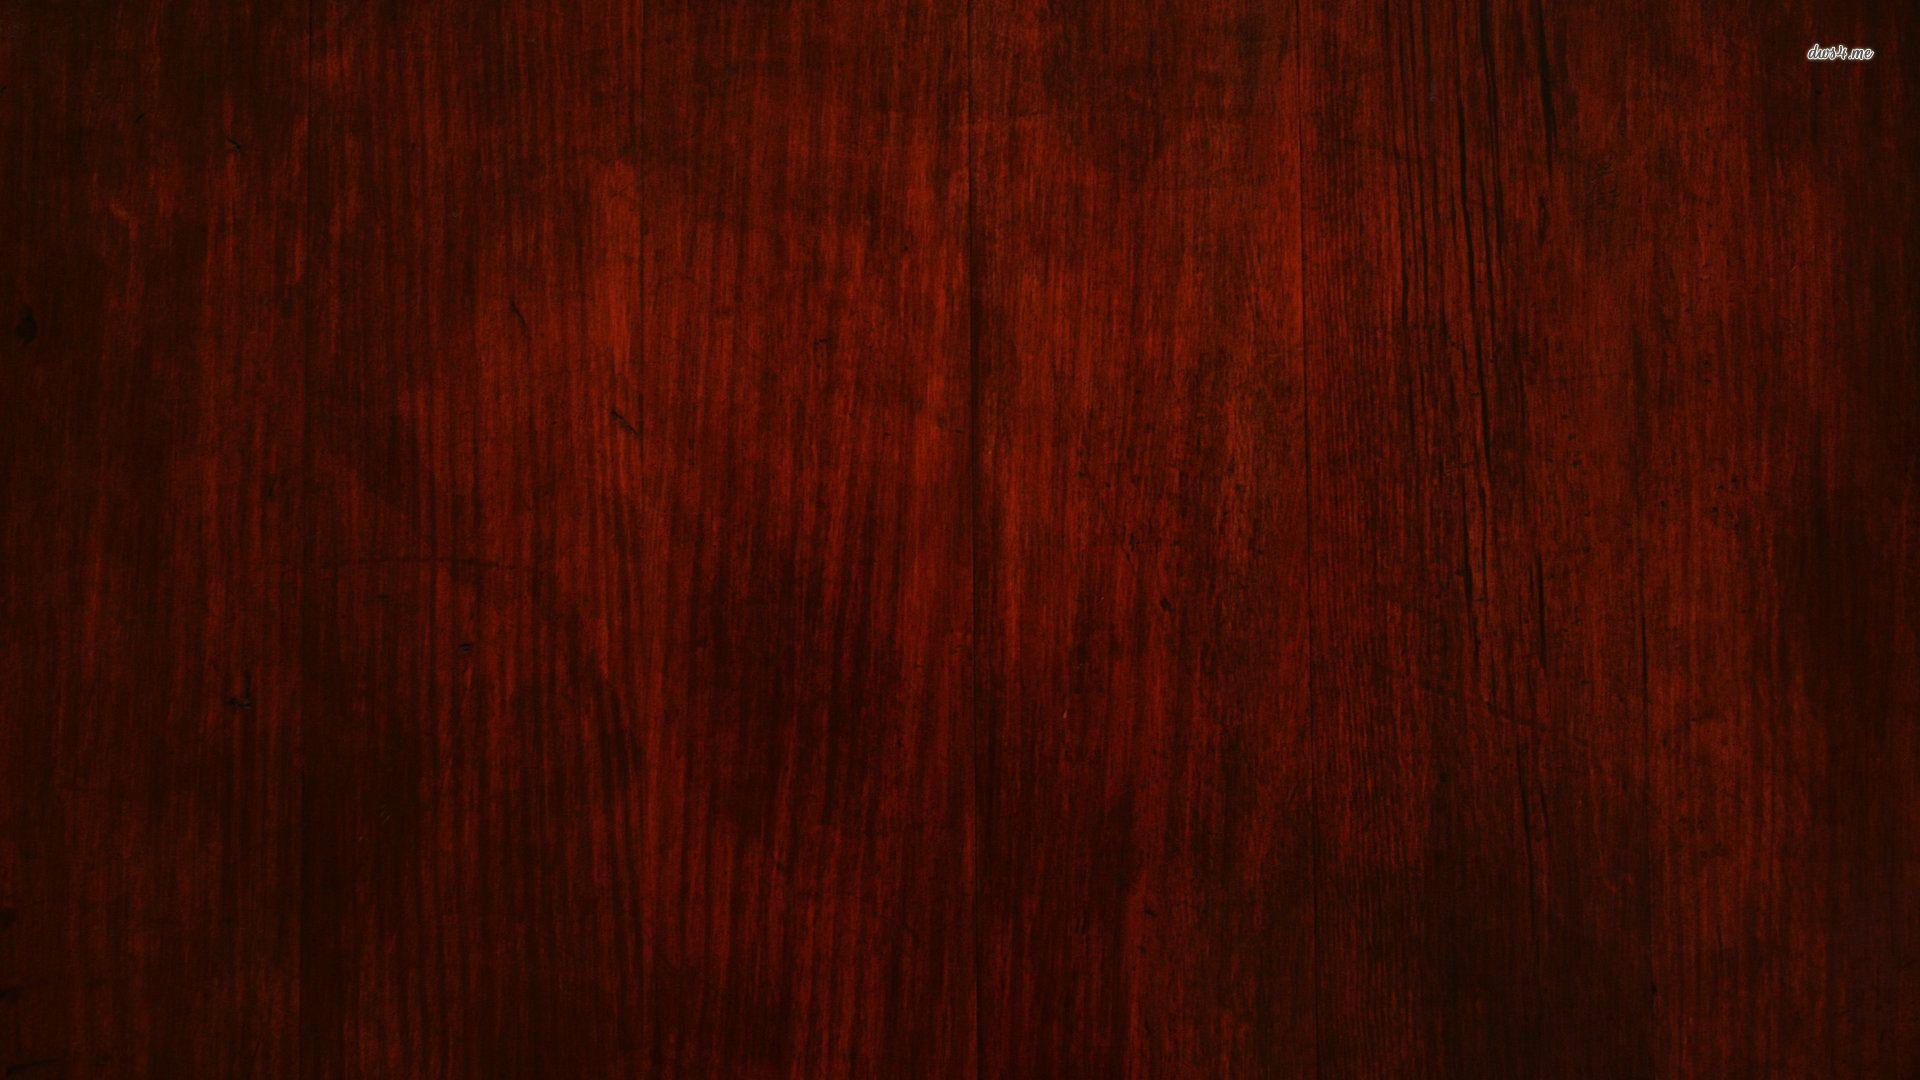 Watercolor paint texture dark maroon wallpaper background | free image by  rawpixel.com / Nunny | Pink wallpaper backgrounds, Maroon aesthetic, Maroon  background